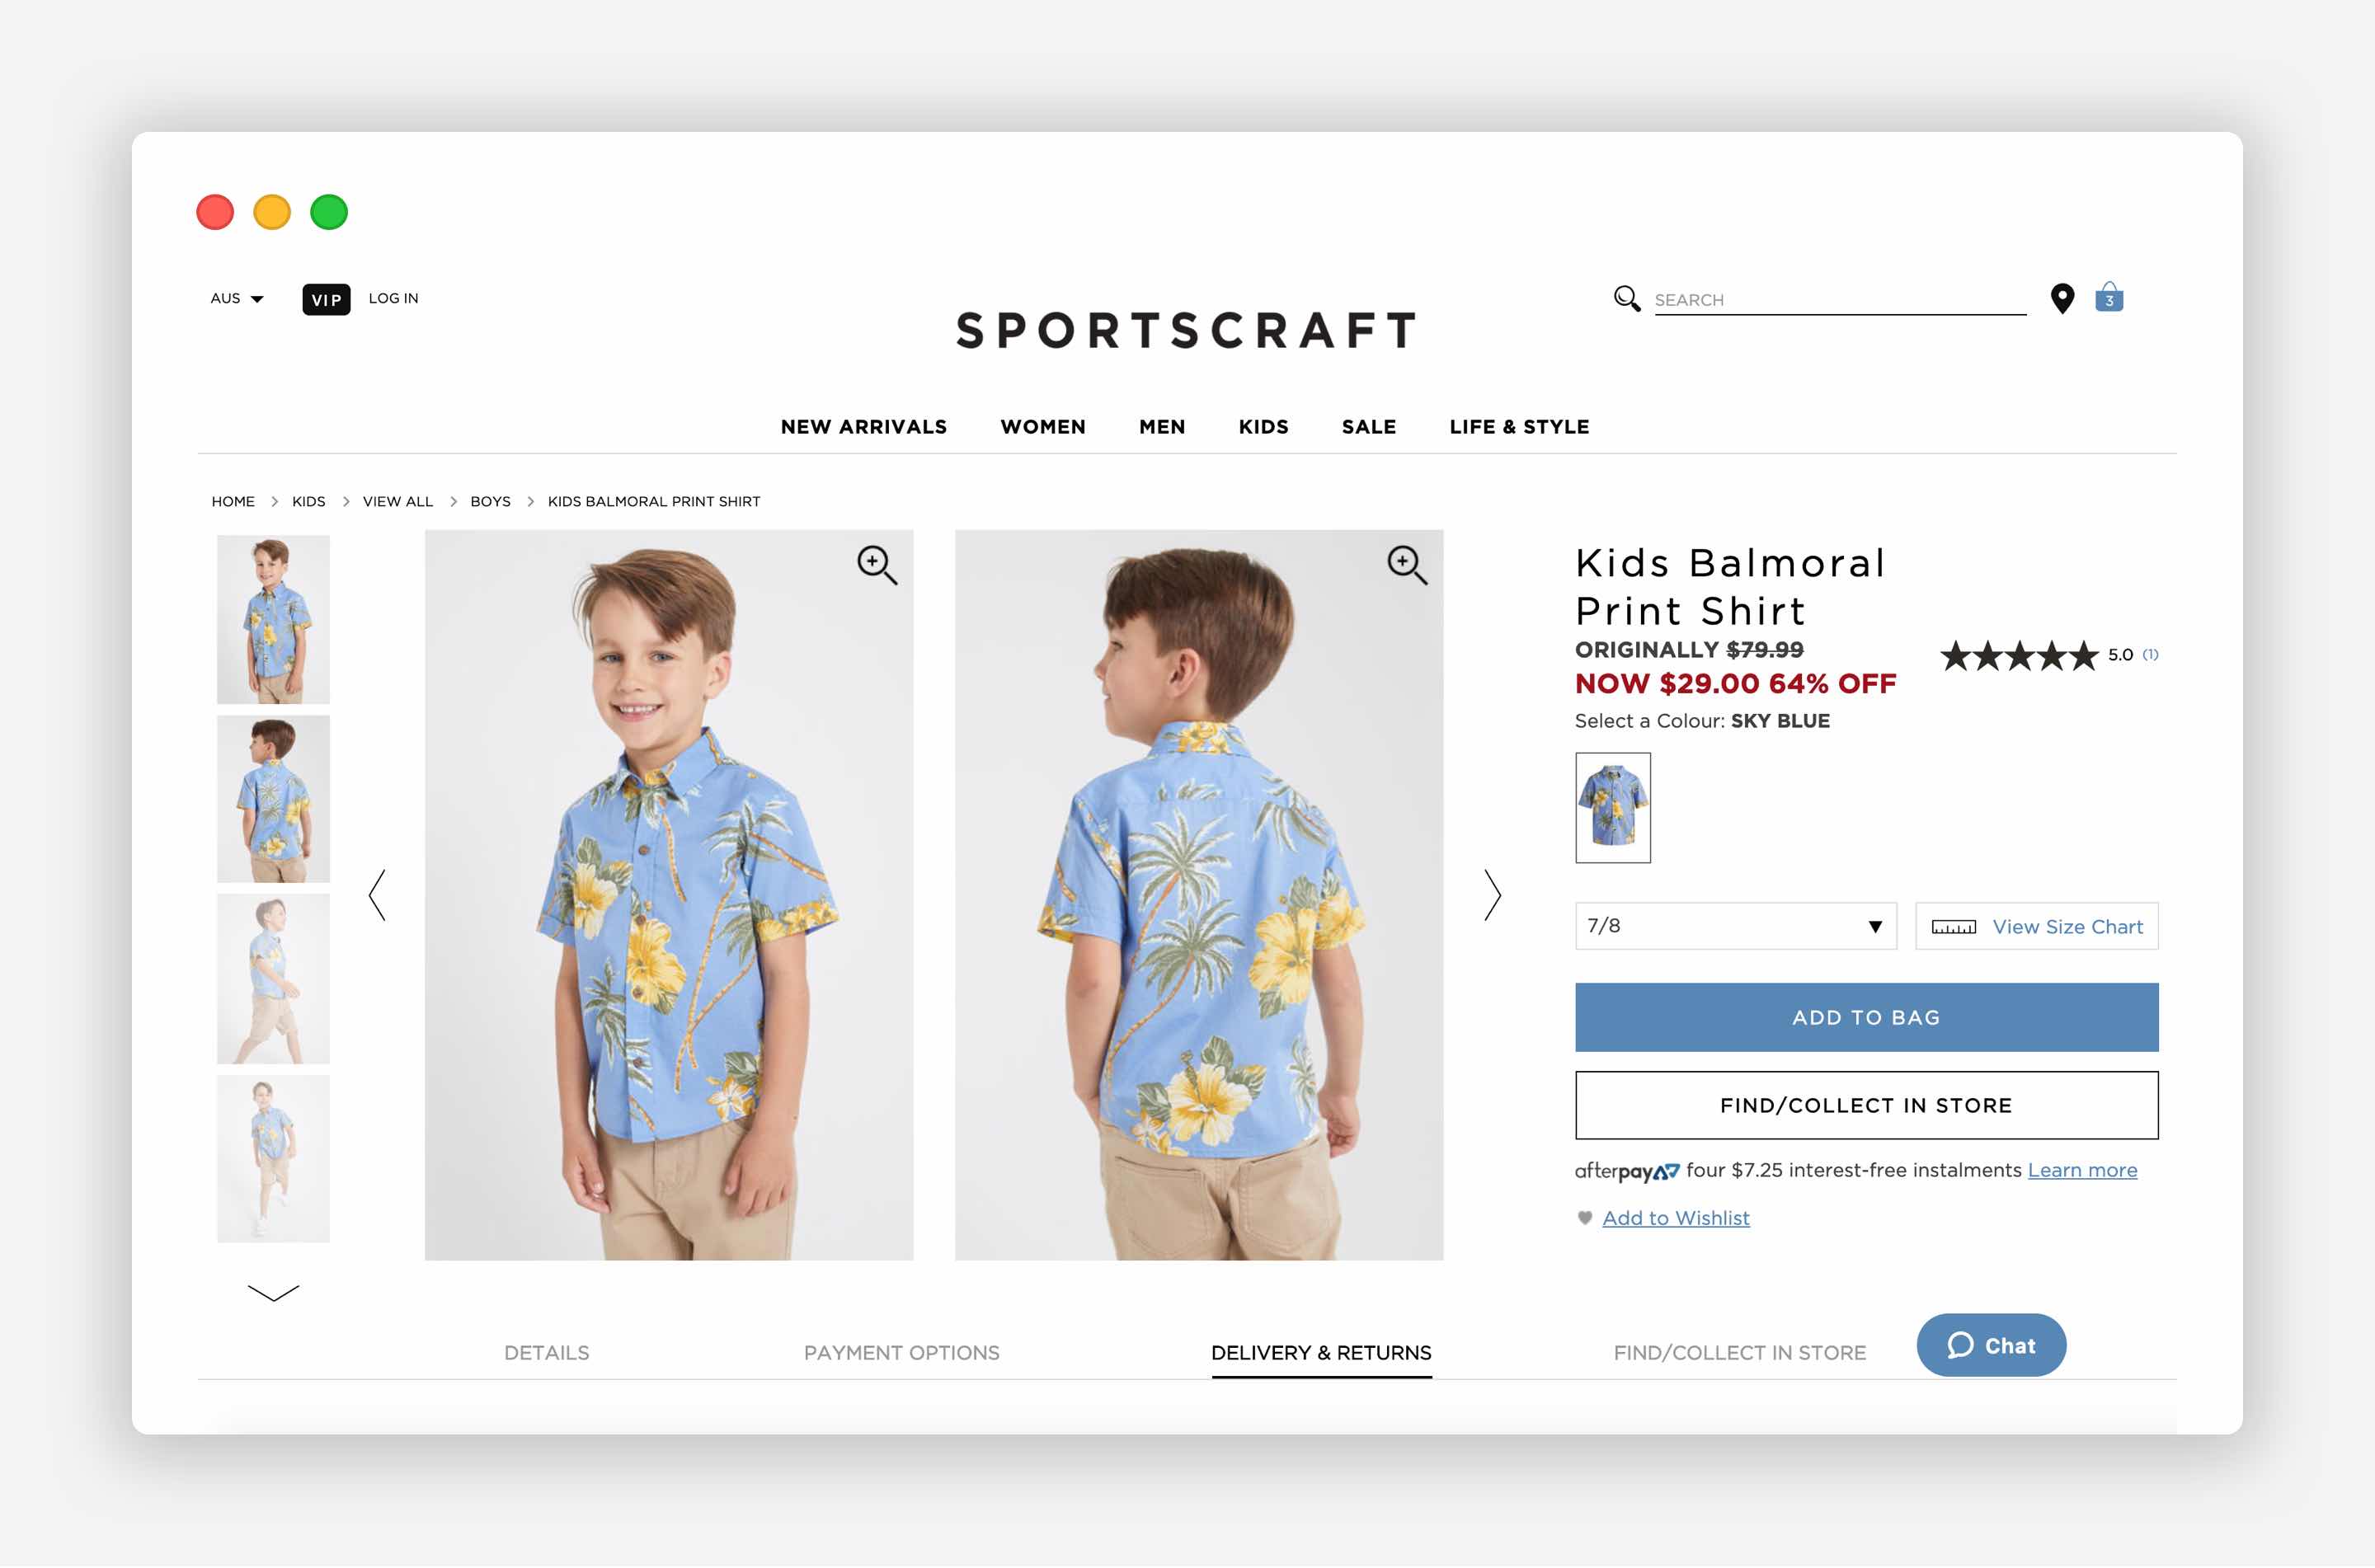 Product title on the product page. The Sportscraft example